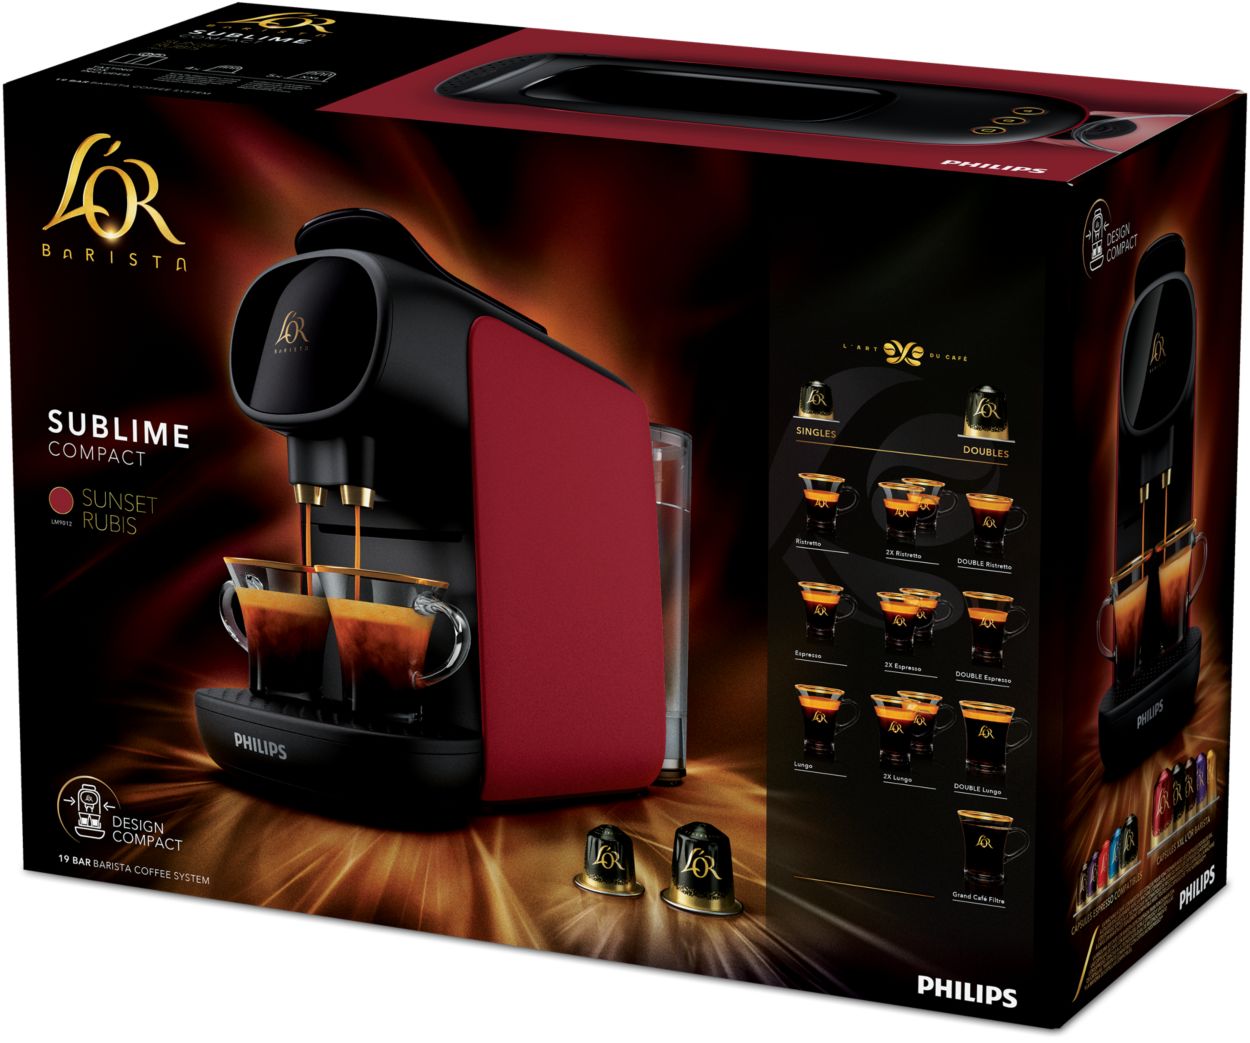 Discover the coffee machine L'OR SUBLIME